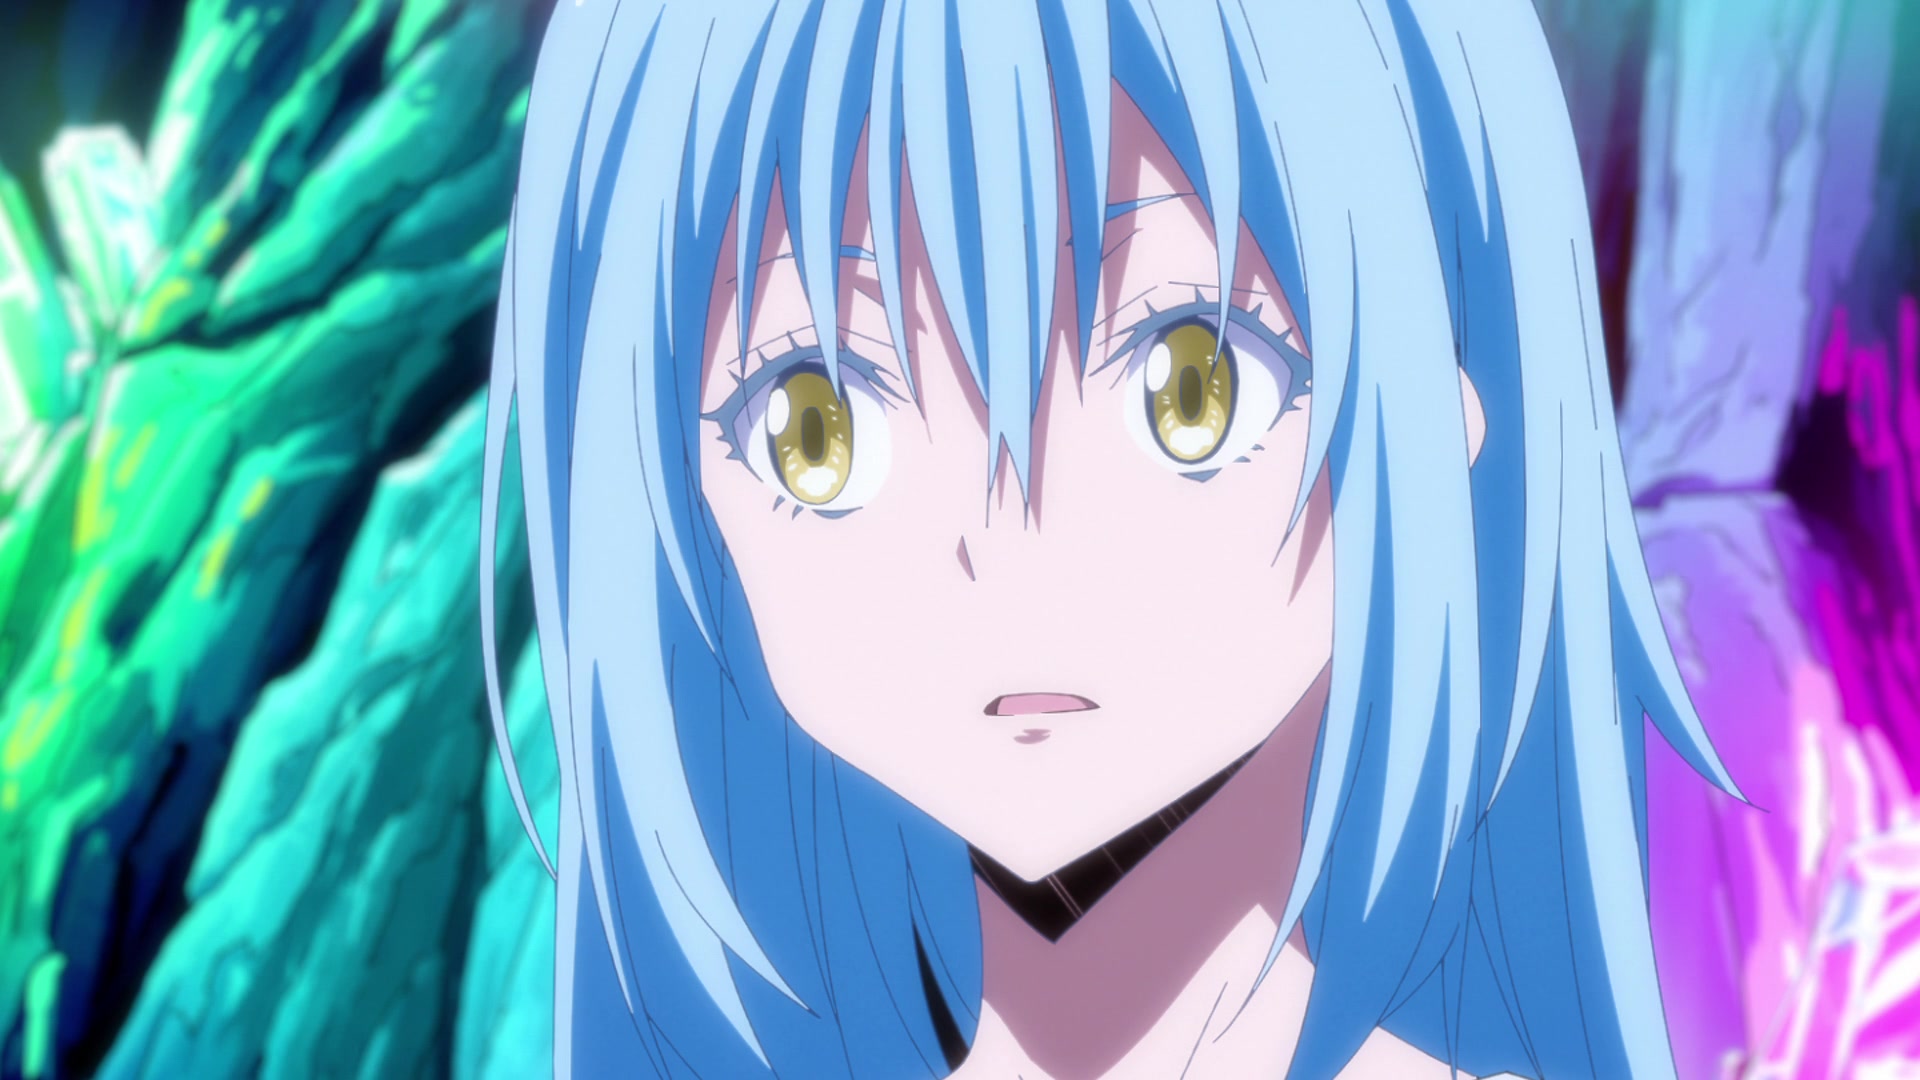 That Time I Got Reincarnated as a Slime Season 2 Part 2 Episode 1 RELEASE  DATE and TIME, COUNTDOWN to Premiere